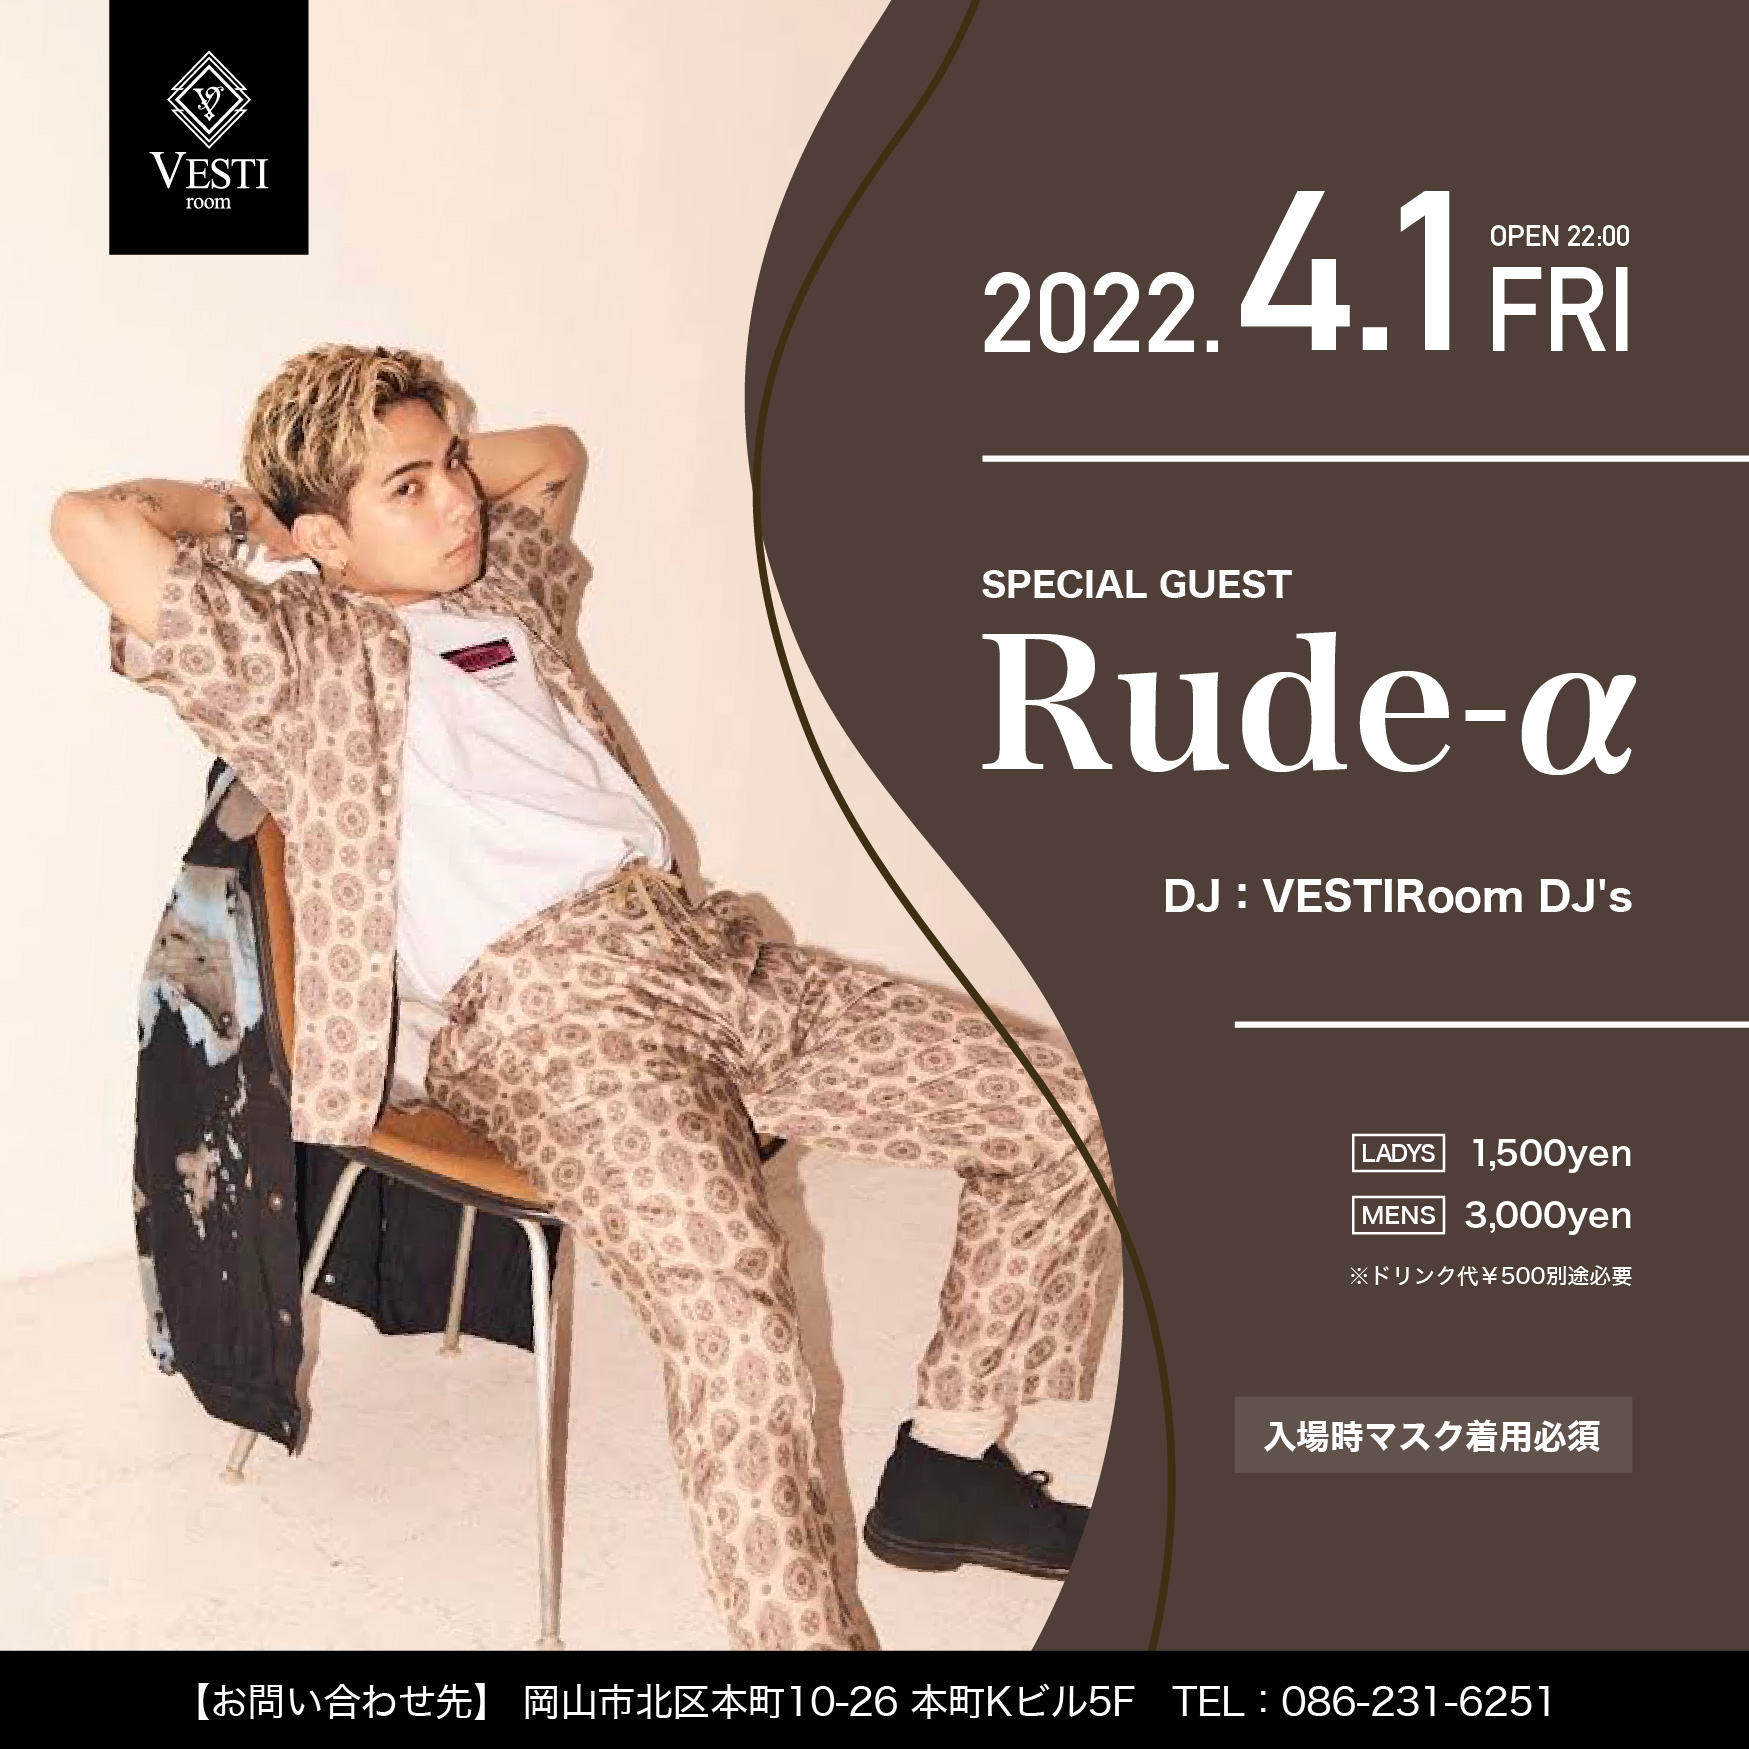 SPECIAL GUEST : Rude-α